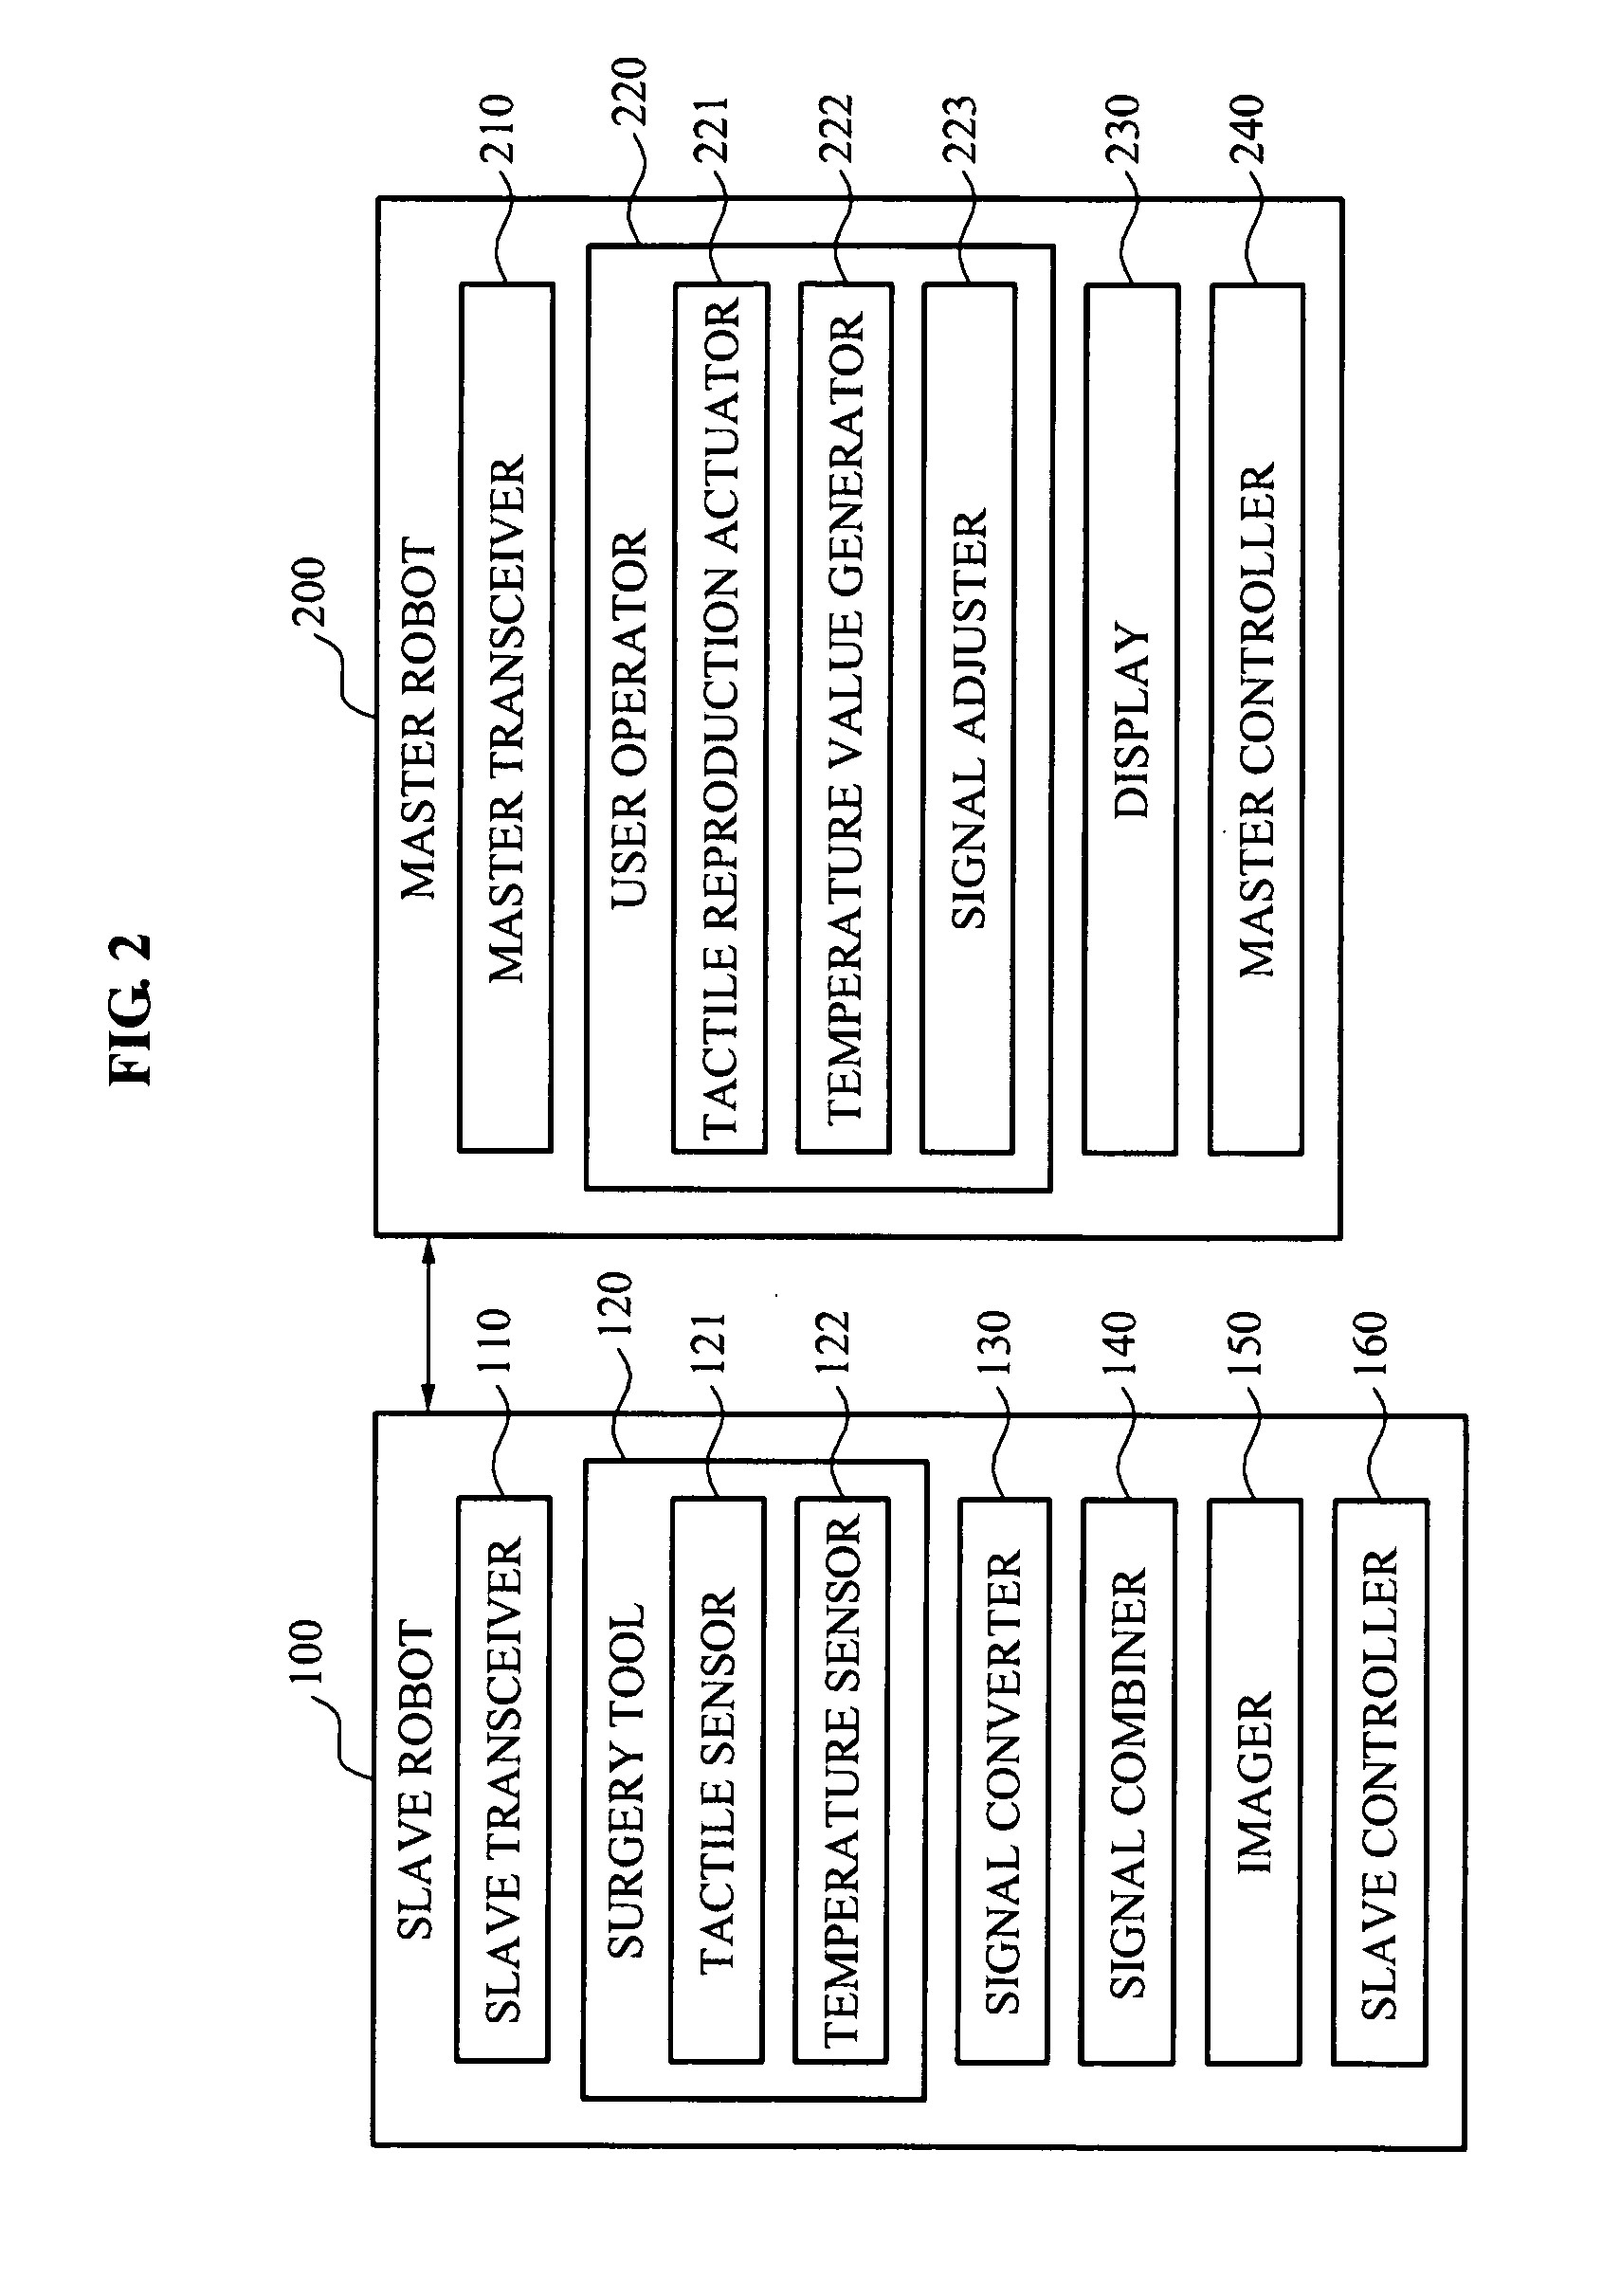 Surgery robot system, surgery apparatus and method for providing tactile feedback